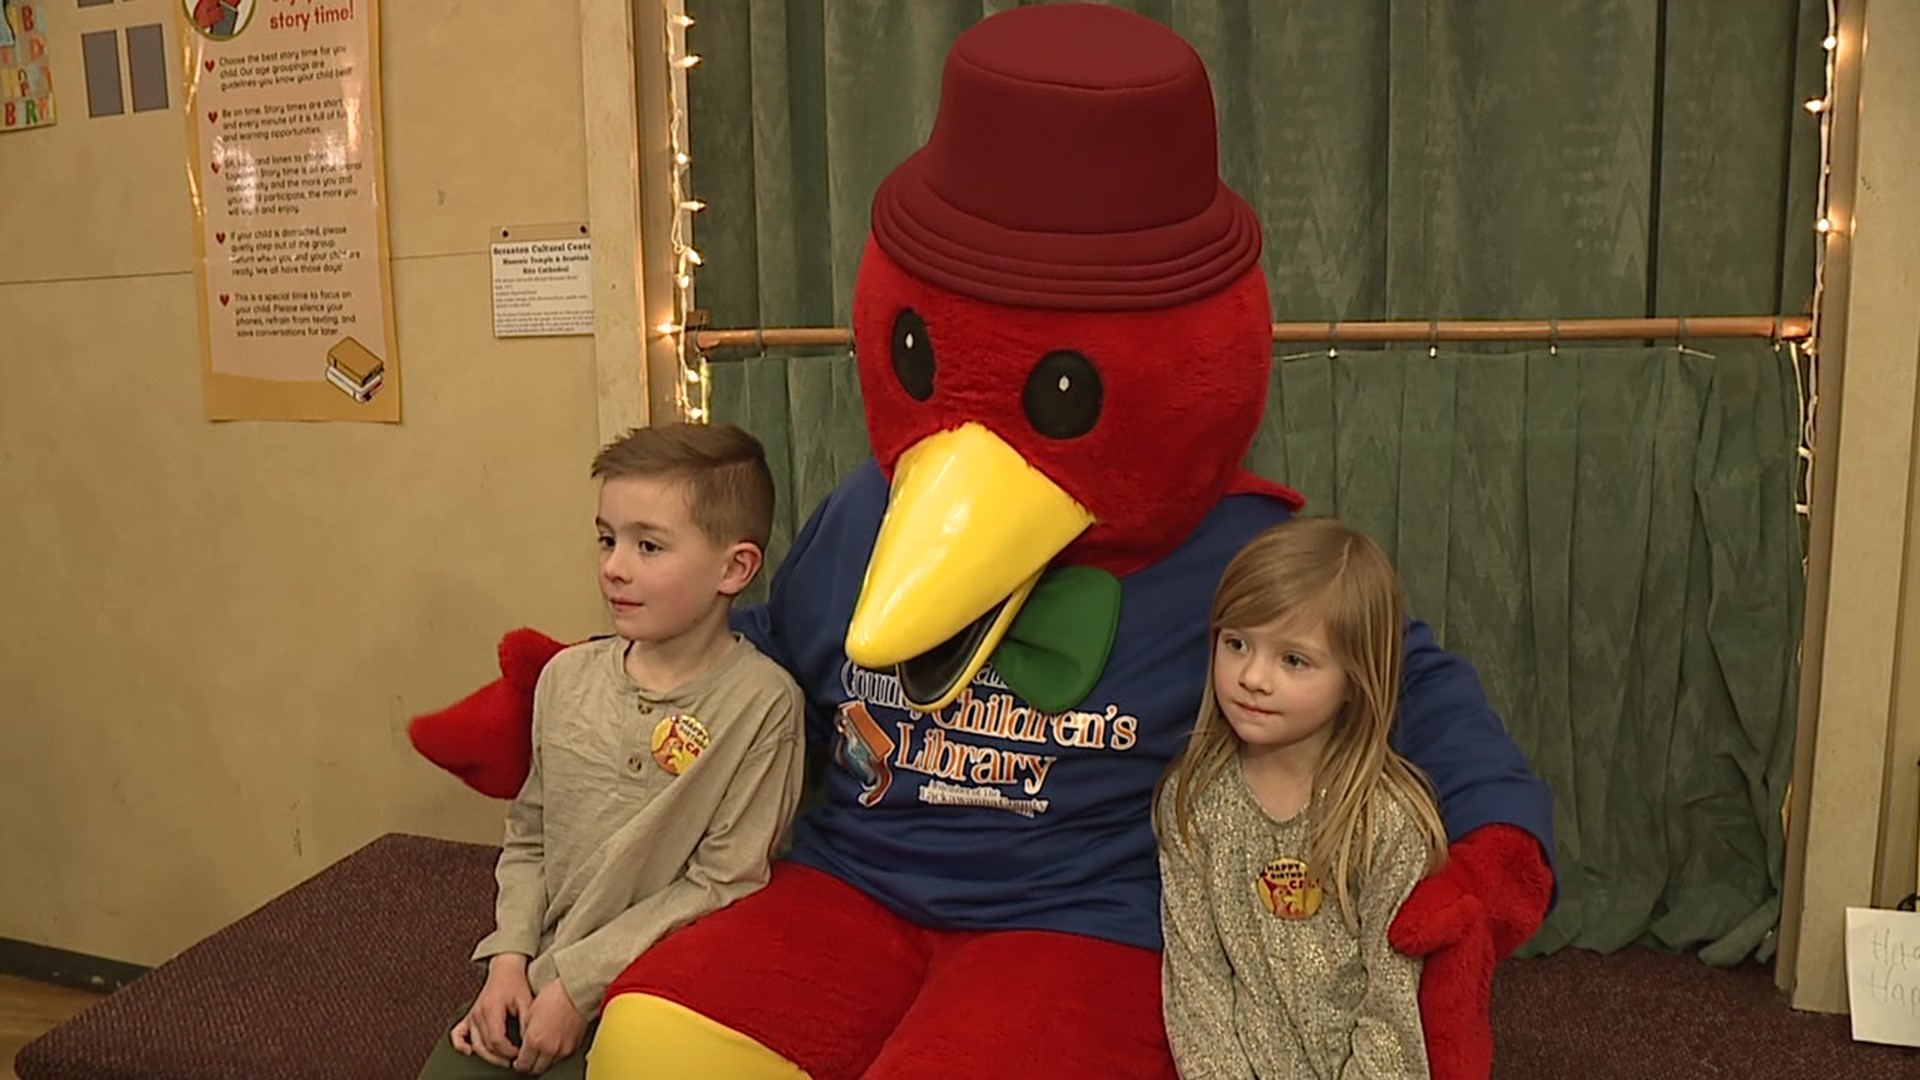 Cal celebrated his 36th birthday and made an appearance at the Lackawanna County Children's Library.